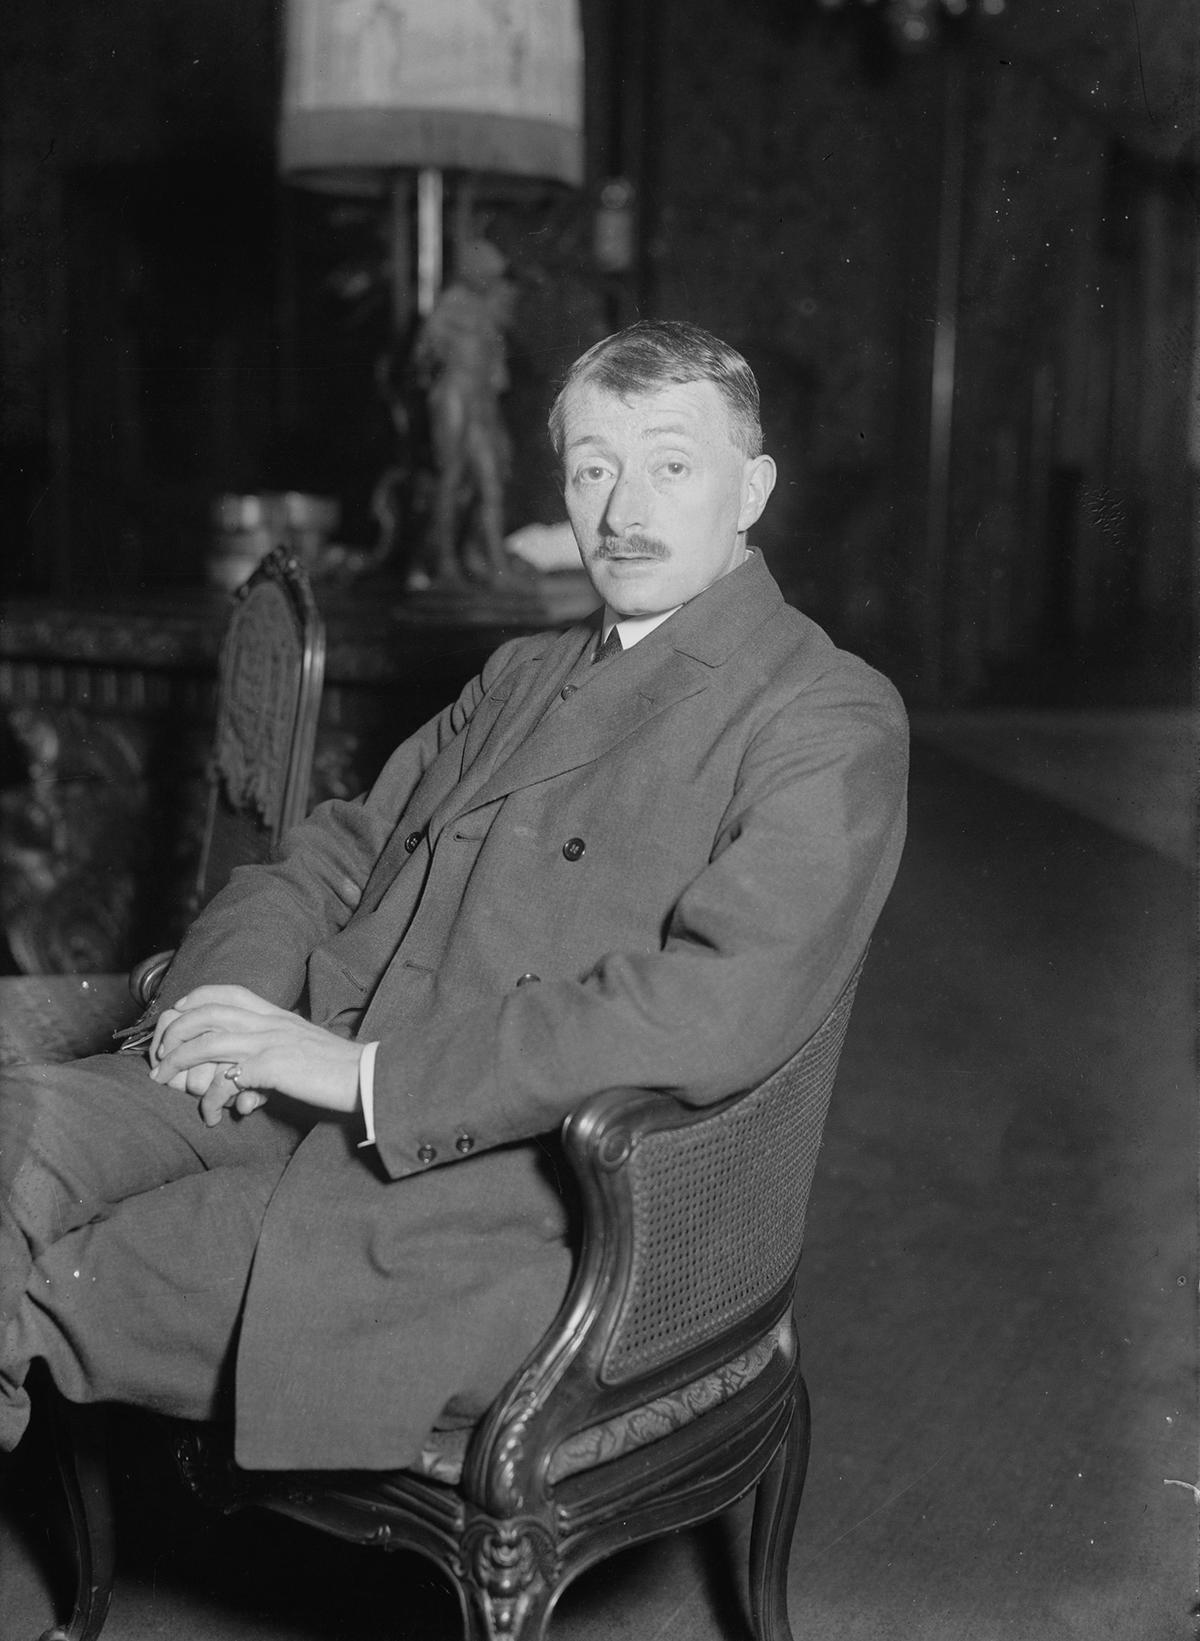 In his personal life, John Masefield celebrated and relished in the simple joys of living. Portrait of Masefield taken in 1916. (Public Domain)